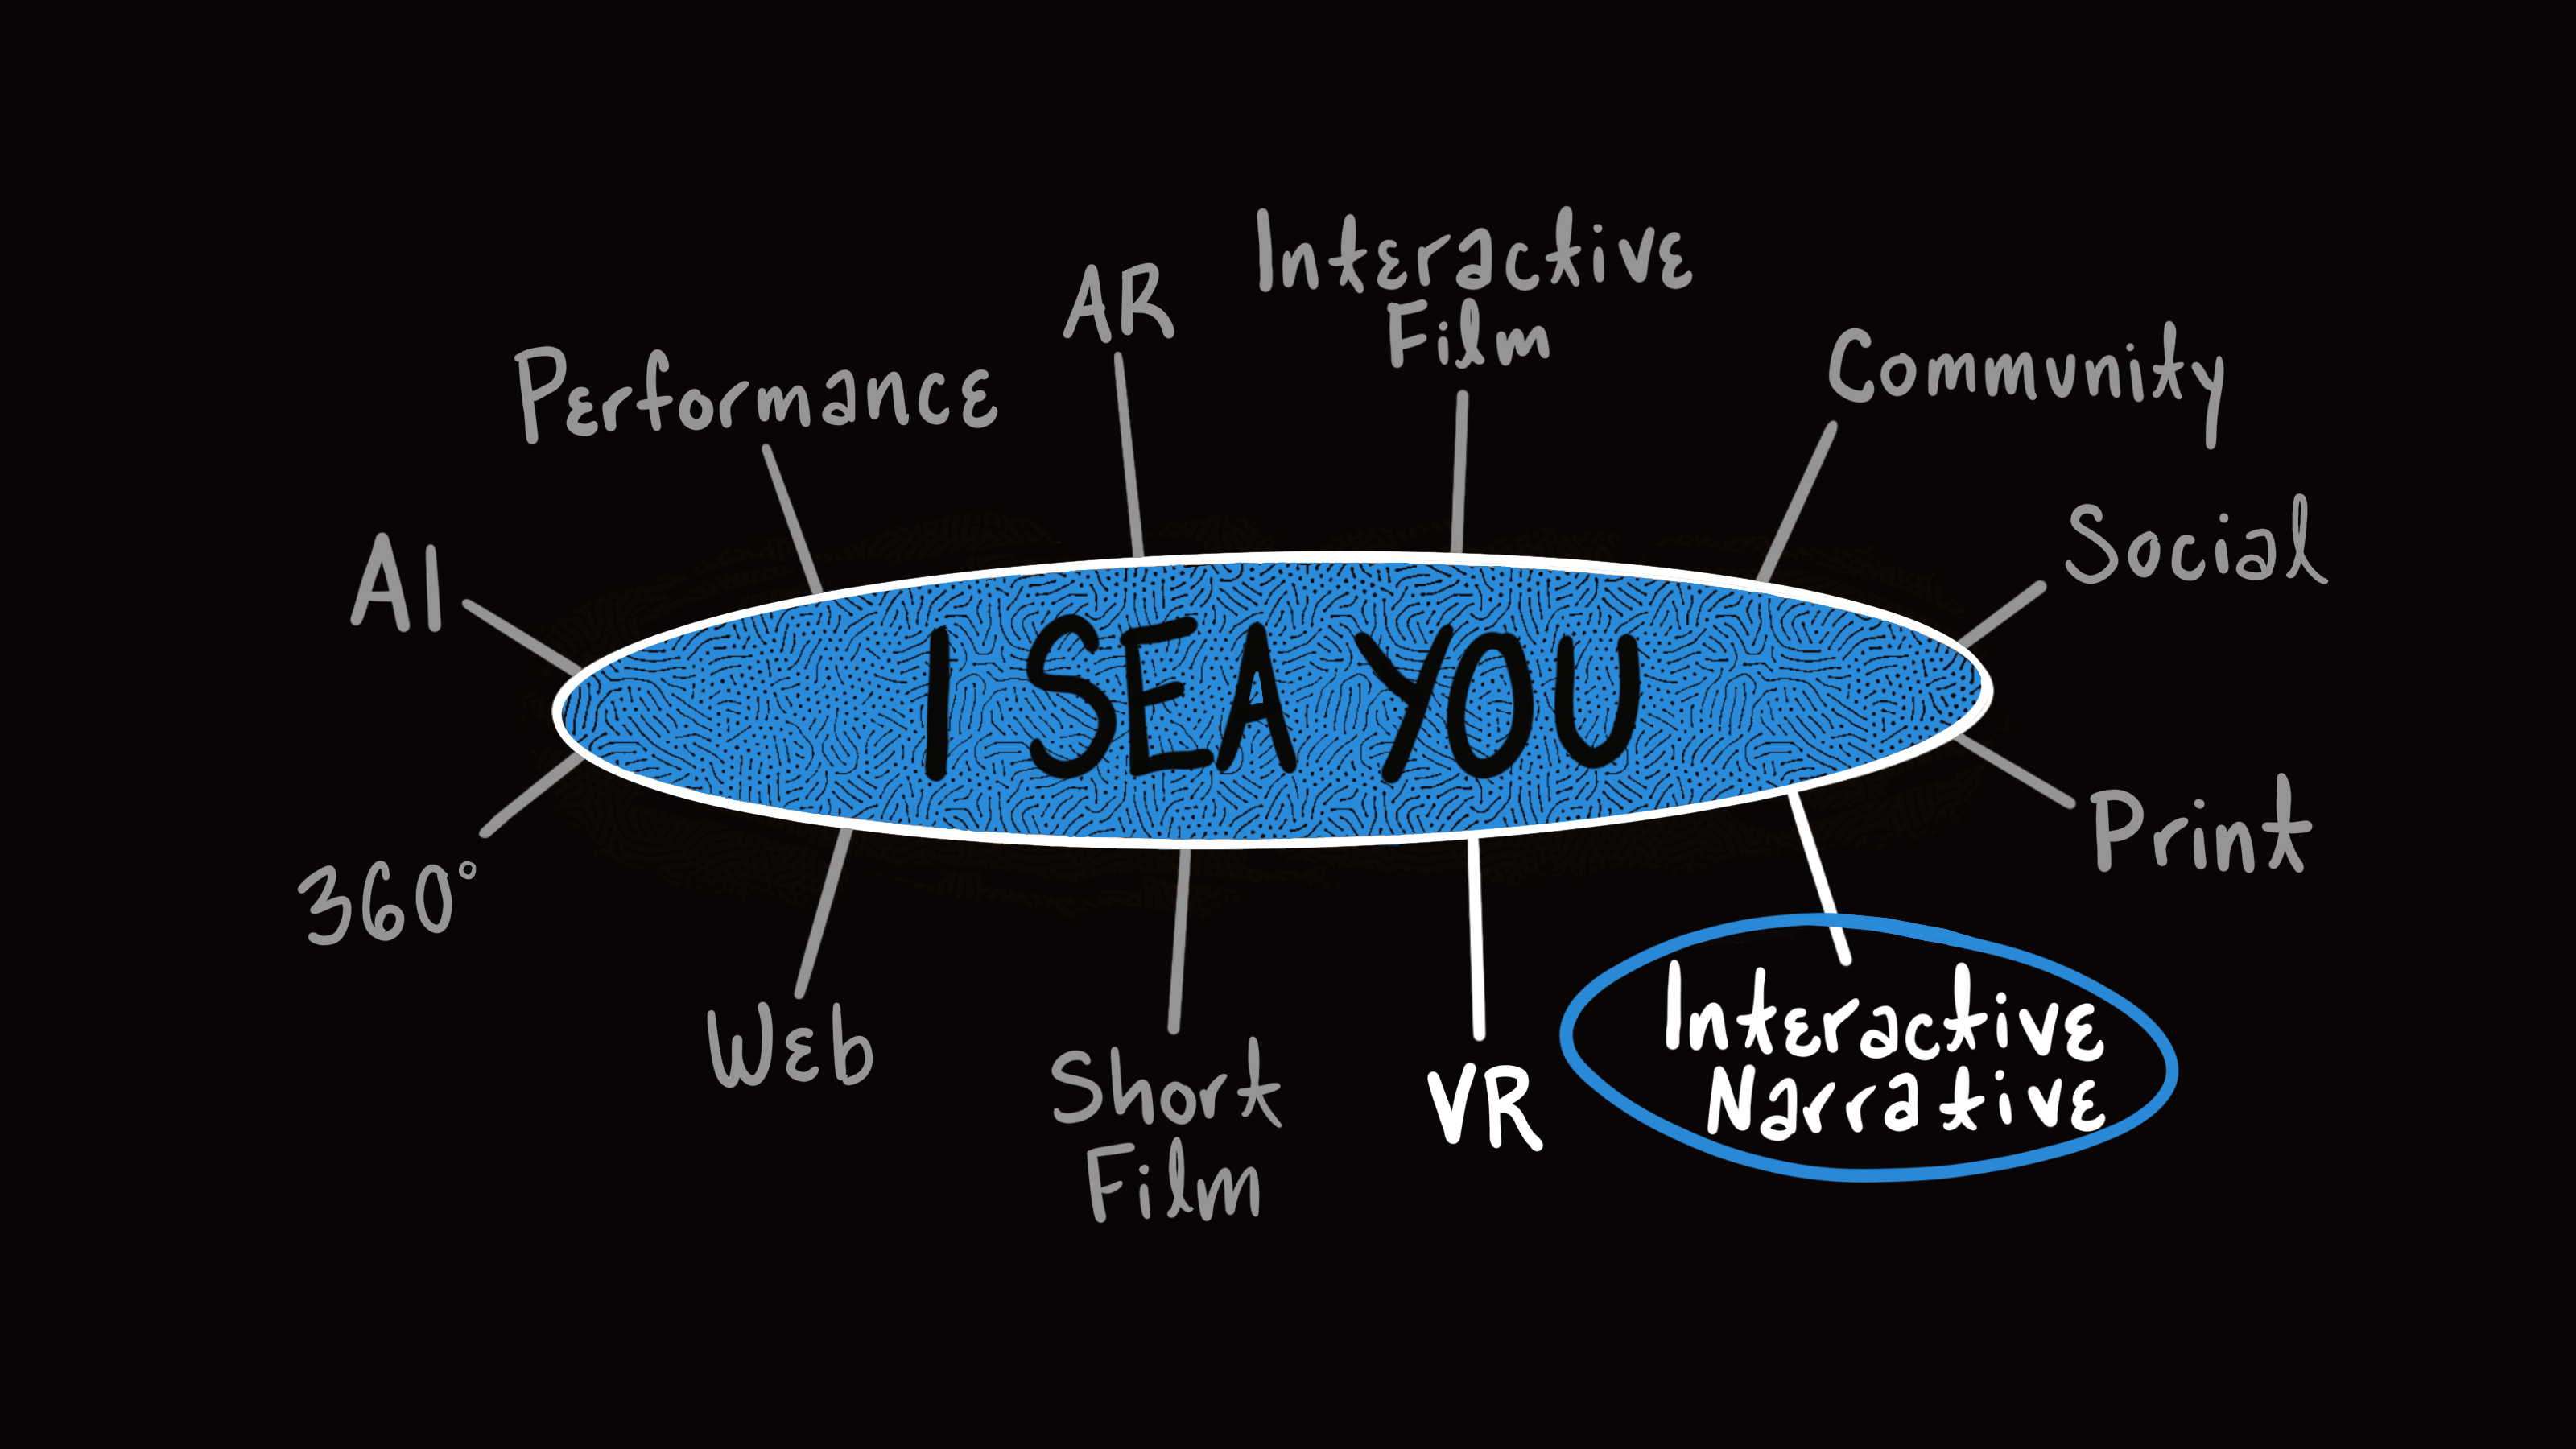 “I Sea you” has the goal to immerse the audience into this imaginary jet real world. Virtual reality technology has the potential to evolvable the user senesces and abstract them into the narrative and open the door to the user to experiment with a personal first-person experience. 